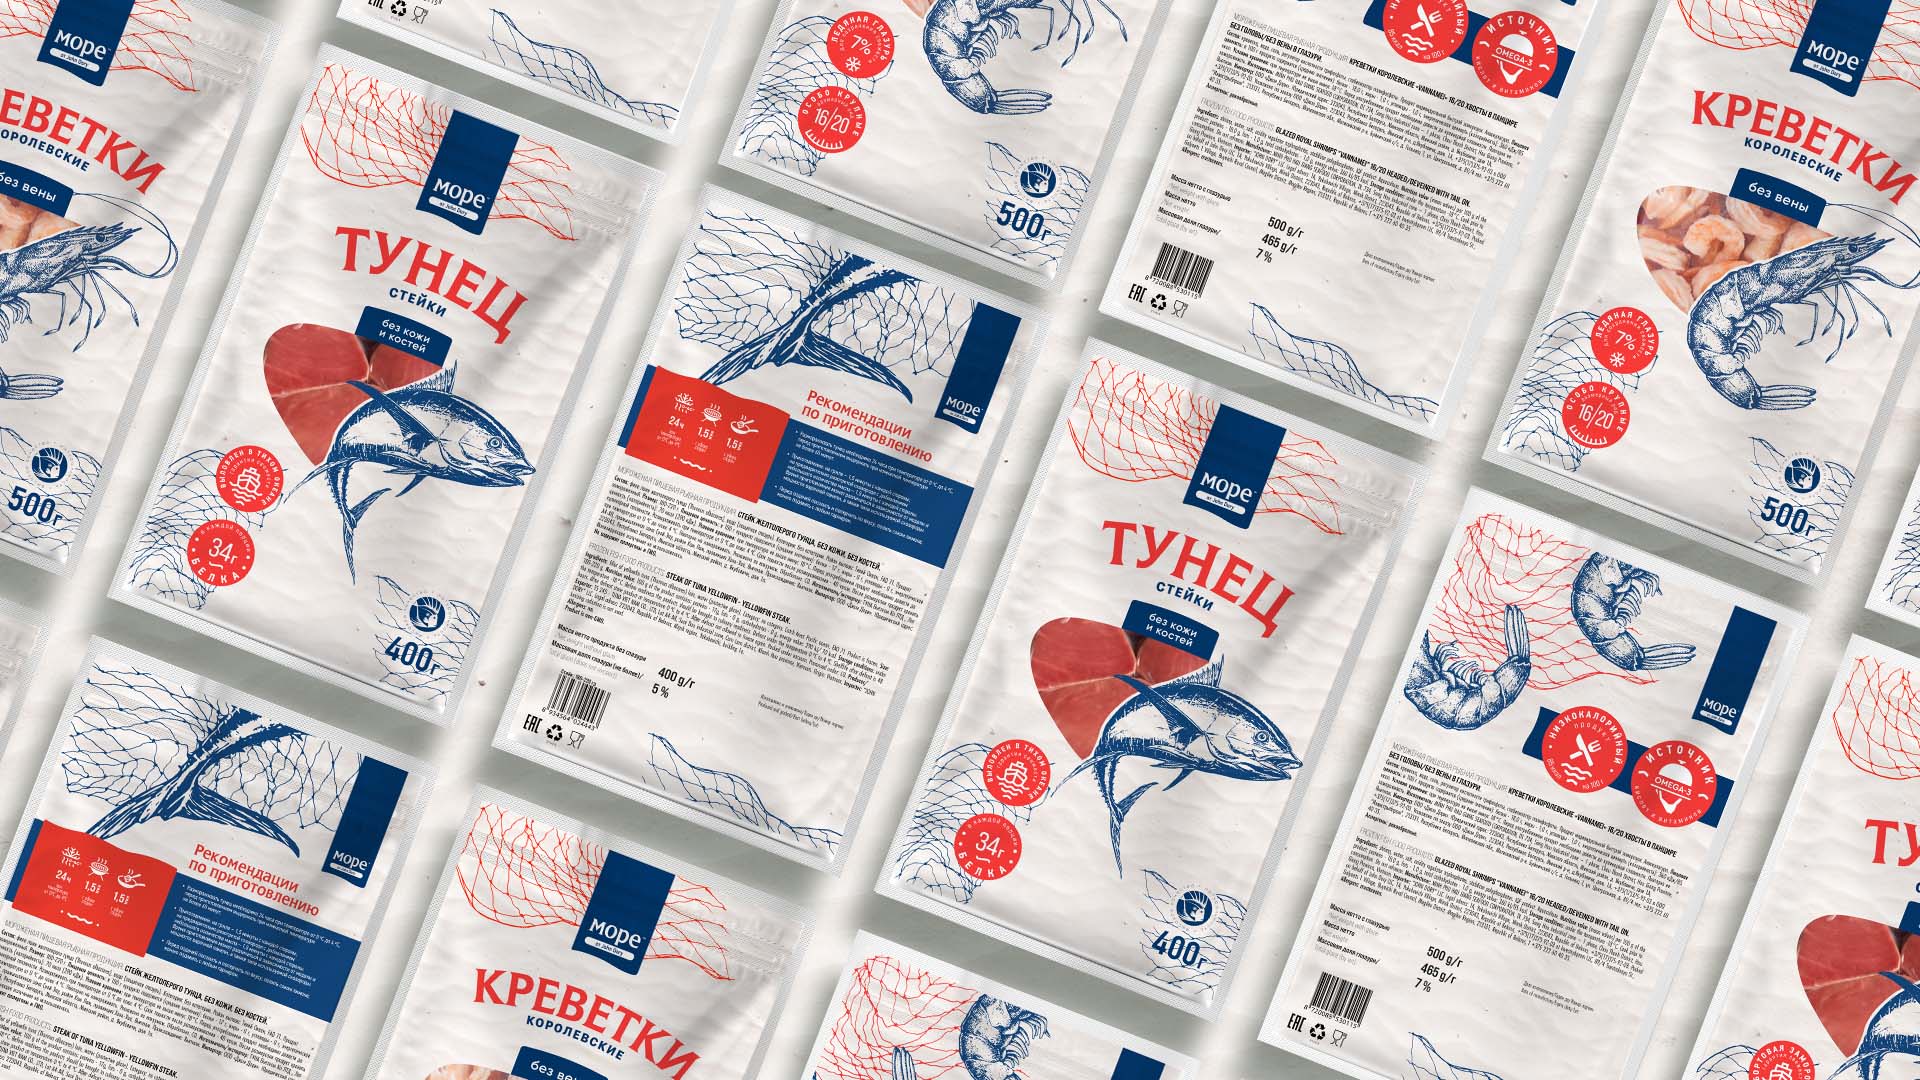 Frozen Food Products Packaging for John Dory by Moloko Creative